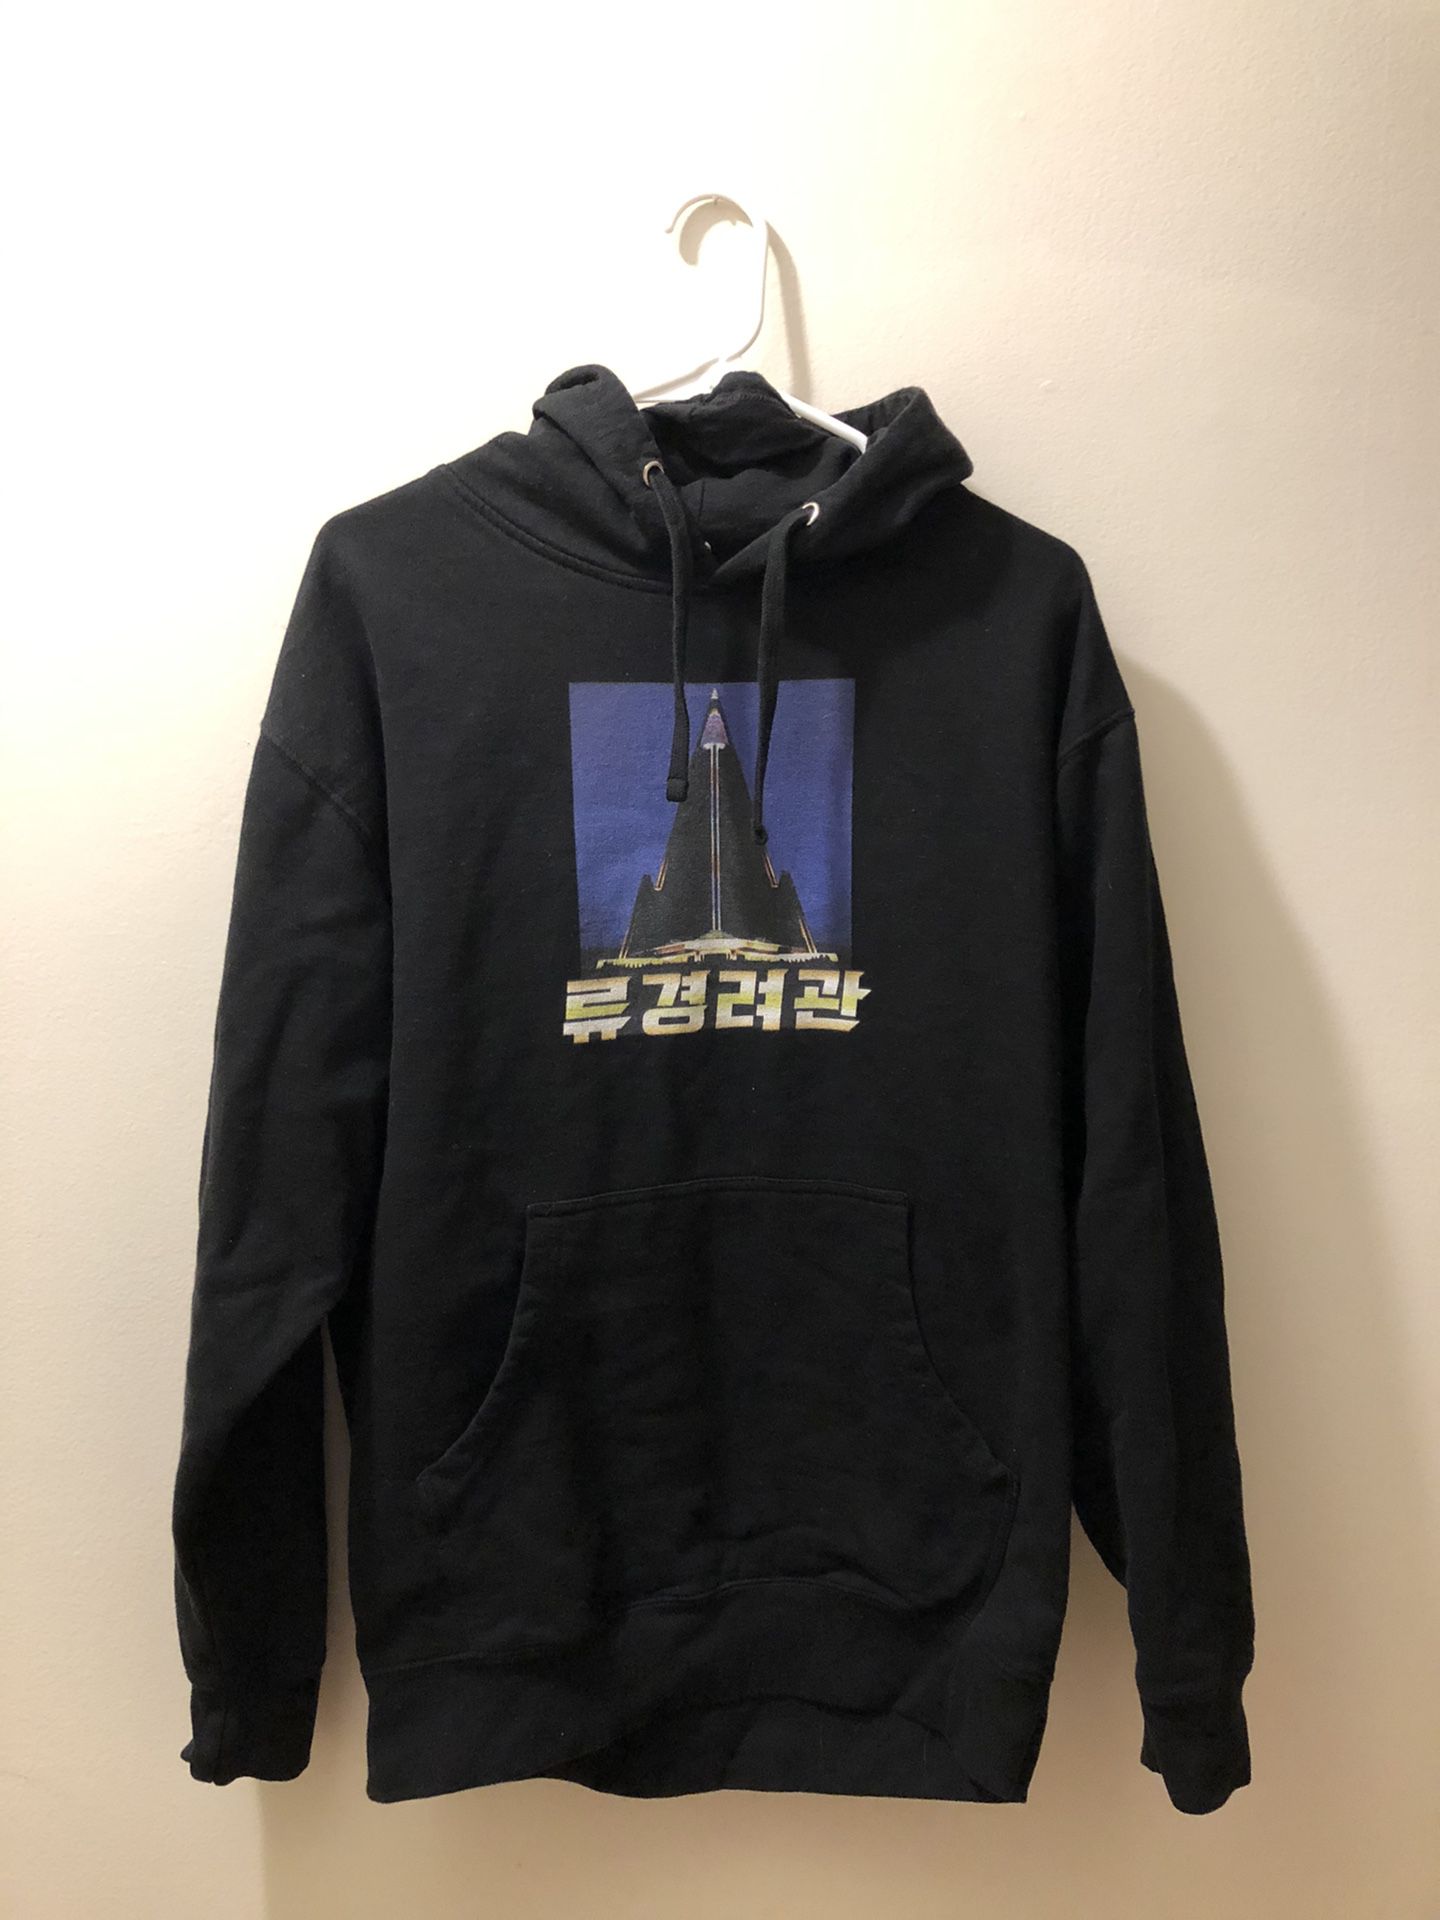 Independent Trading Company - ‘Ryugyong Hotel’ Hoodie - Large (Black)